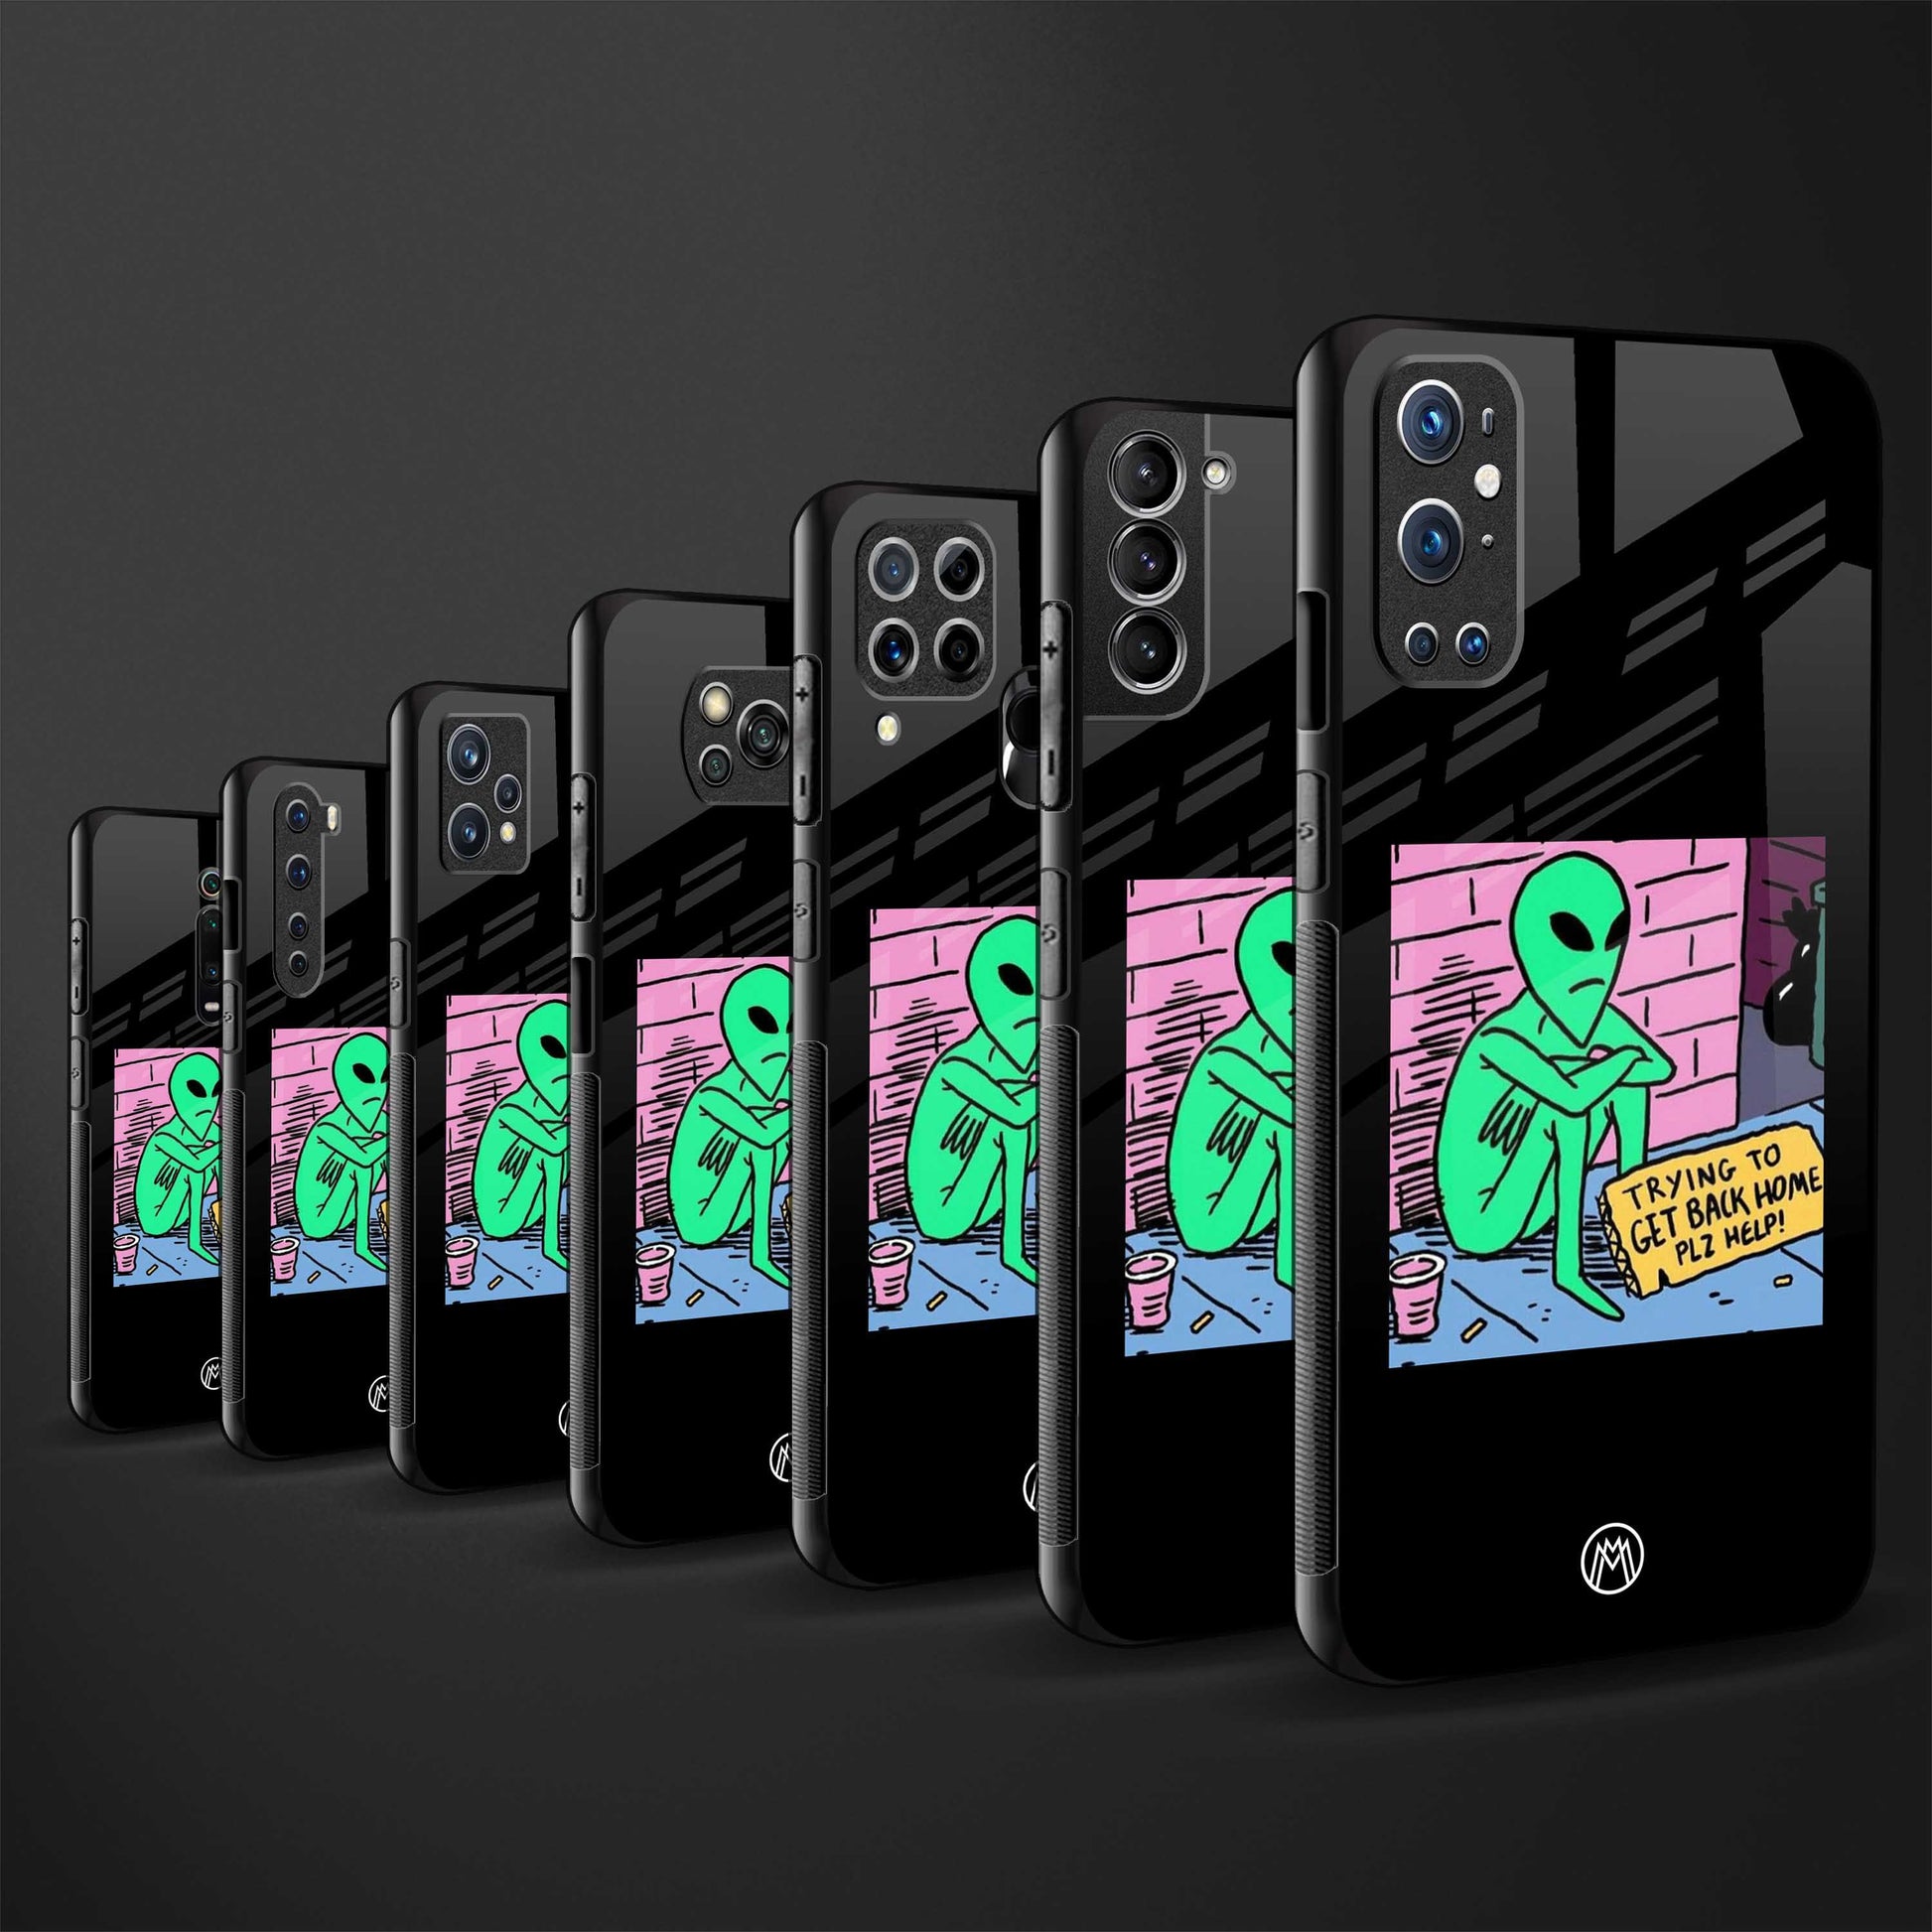 go home alien glass case for iphone 11